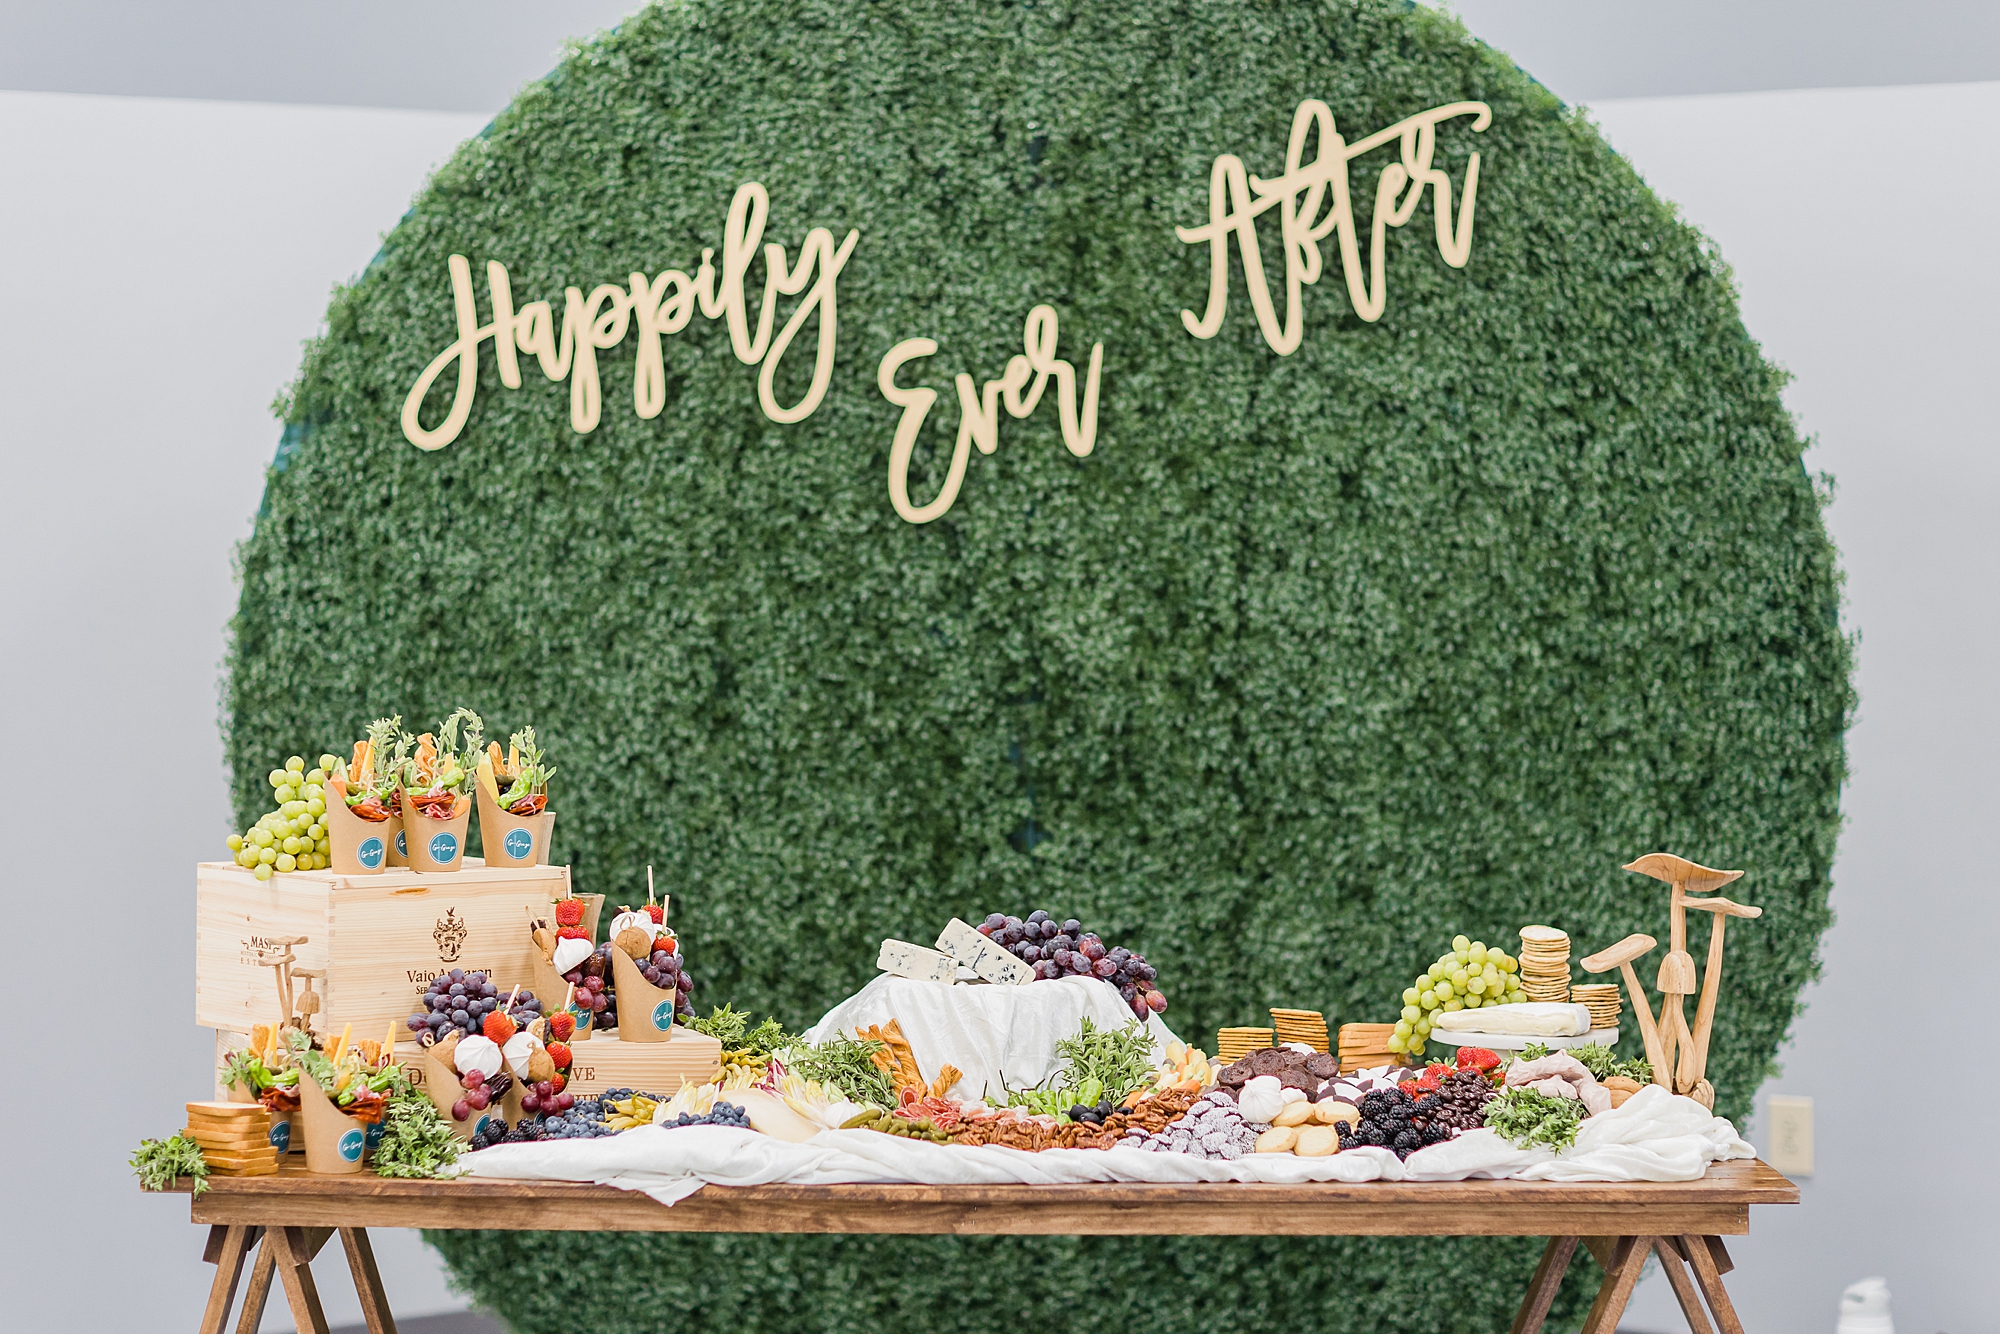 happily ever after sign on greenery wall by dessert table